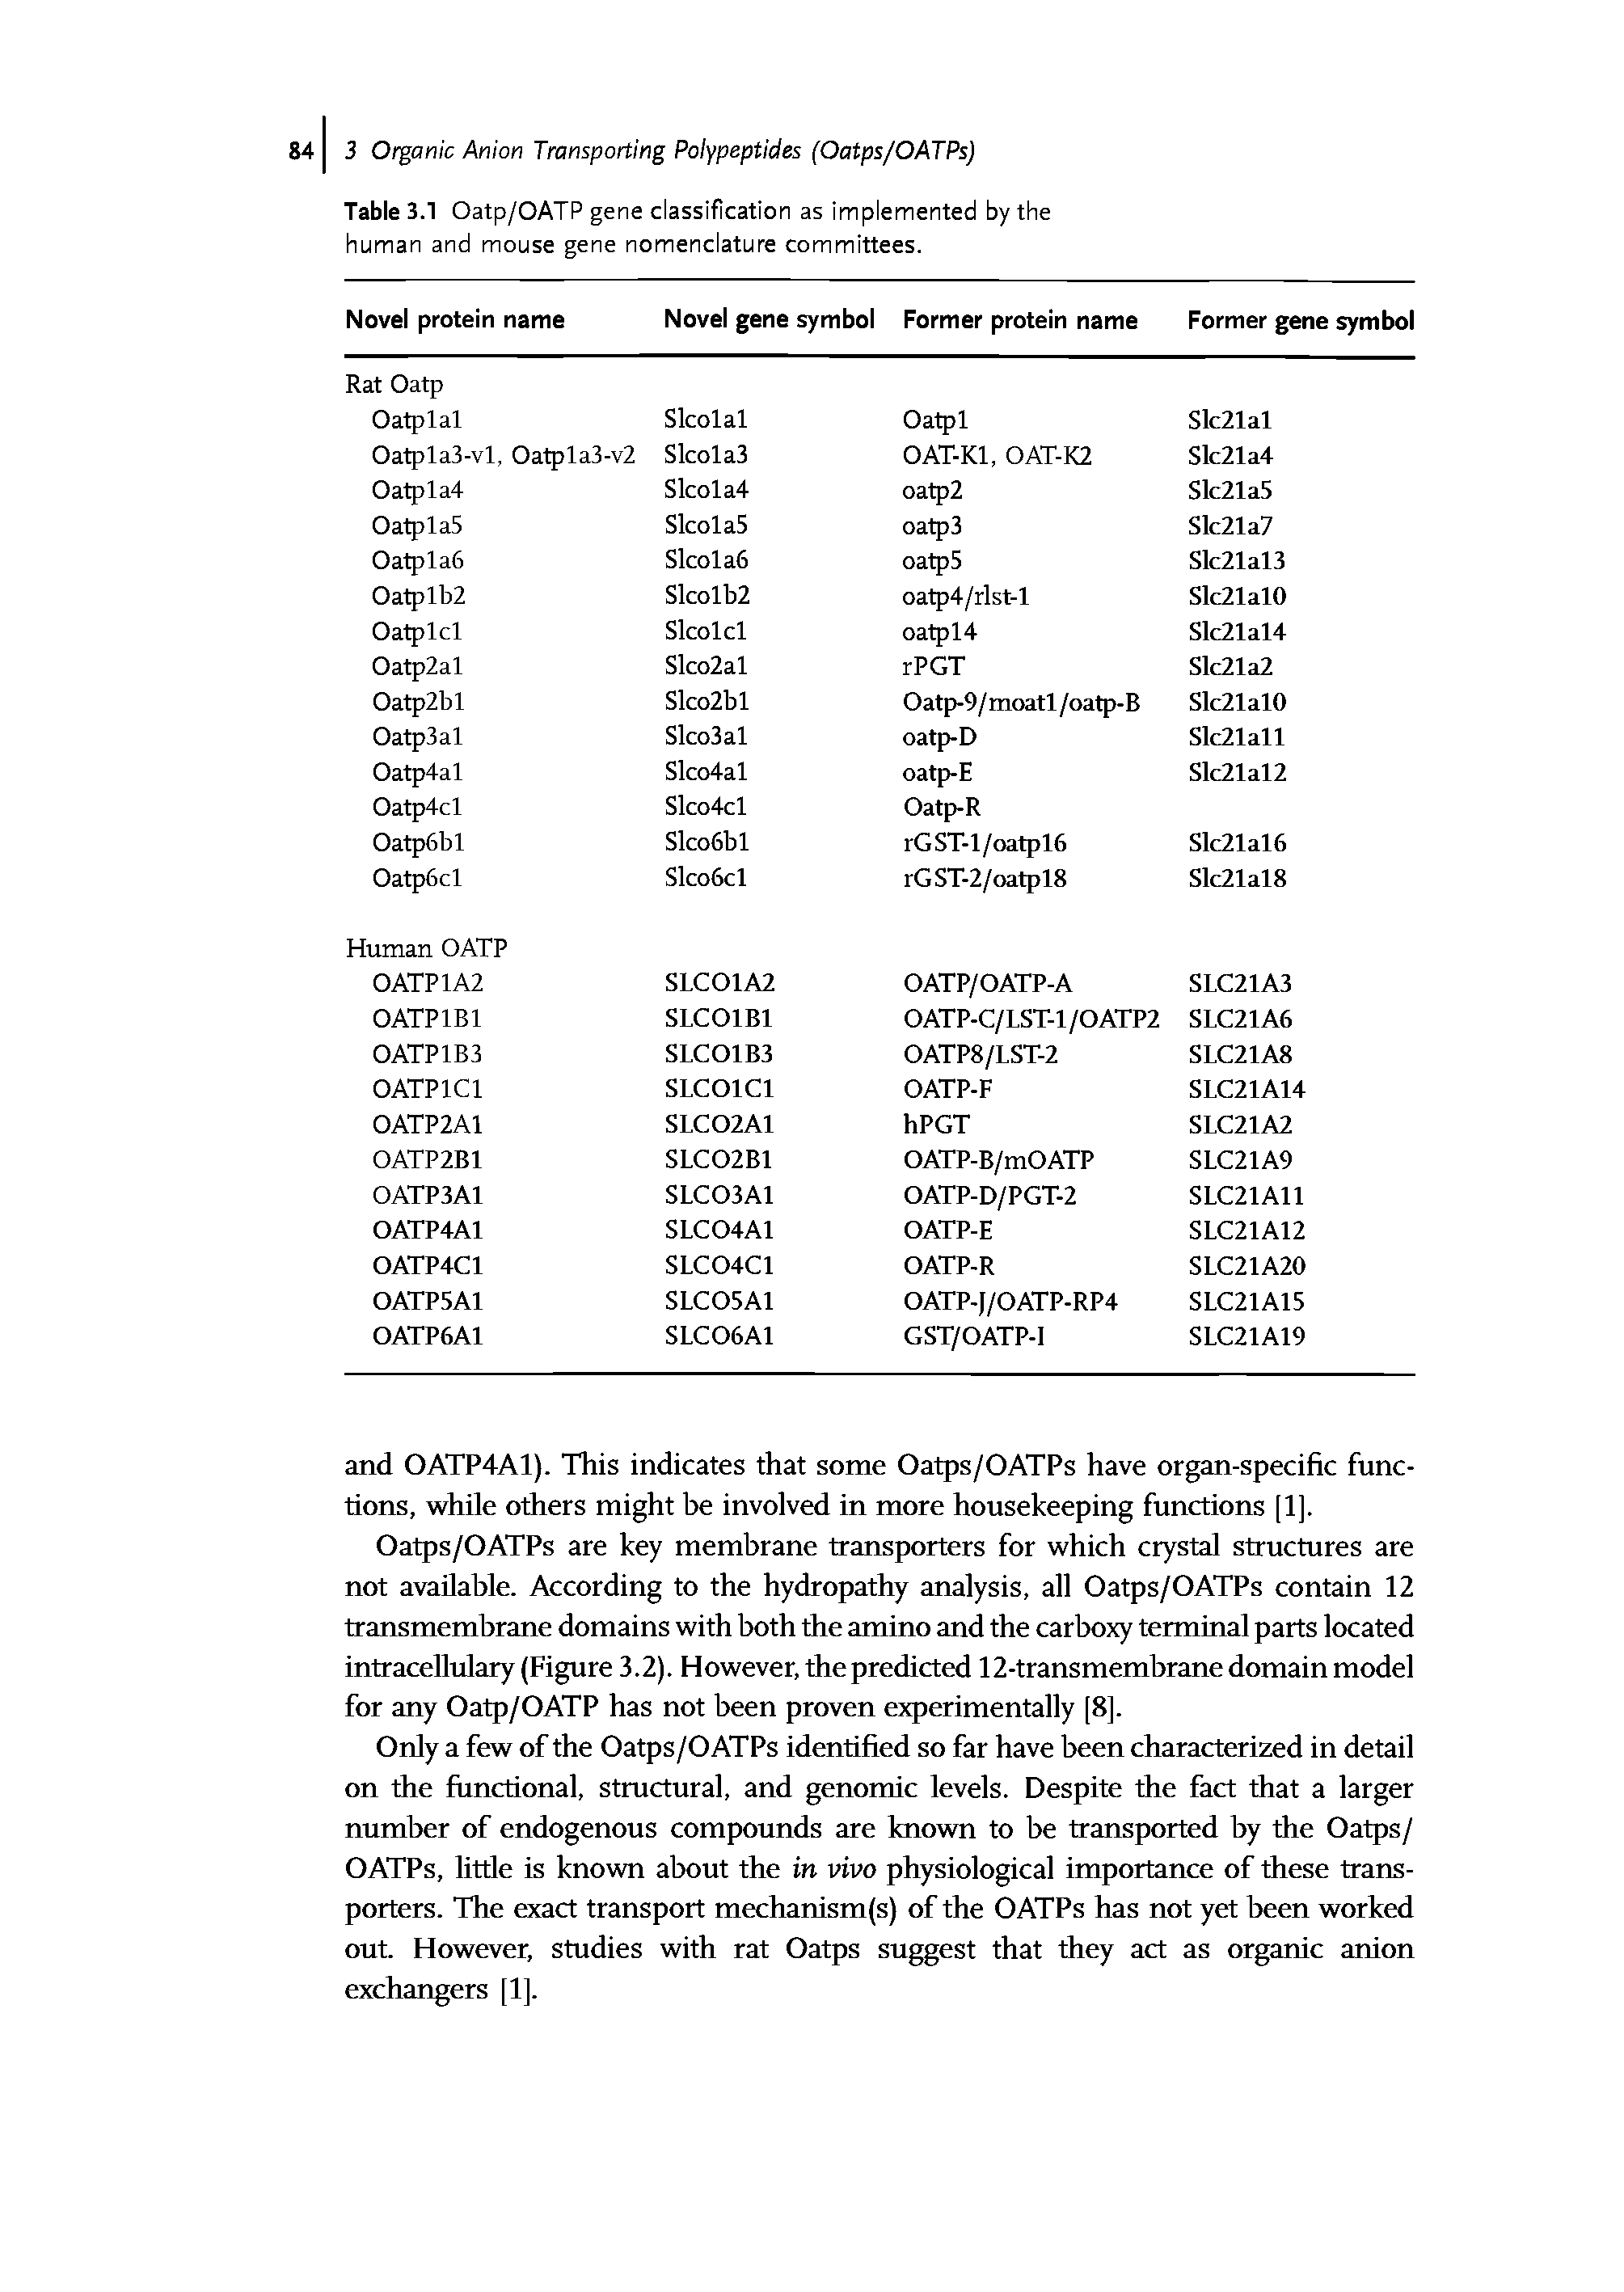 Table 3.1 Oatp/OATP gene classification as implemented by the human and mouse gene nomenclature committees.